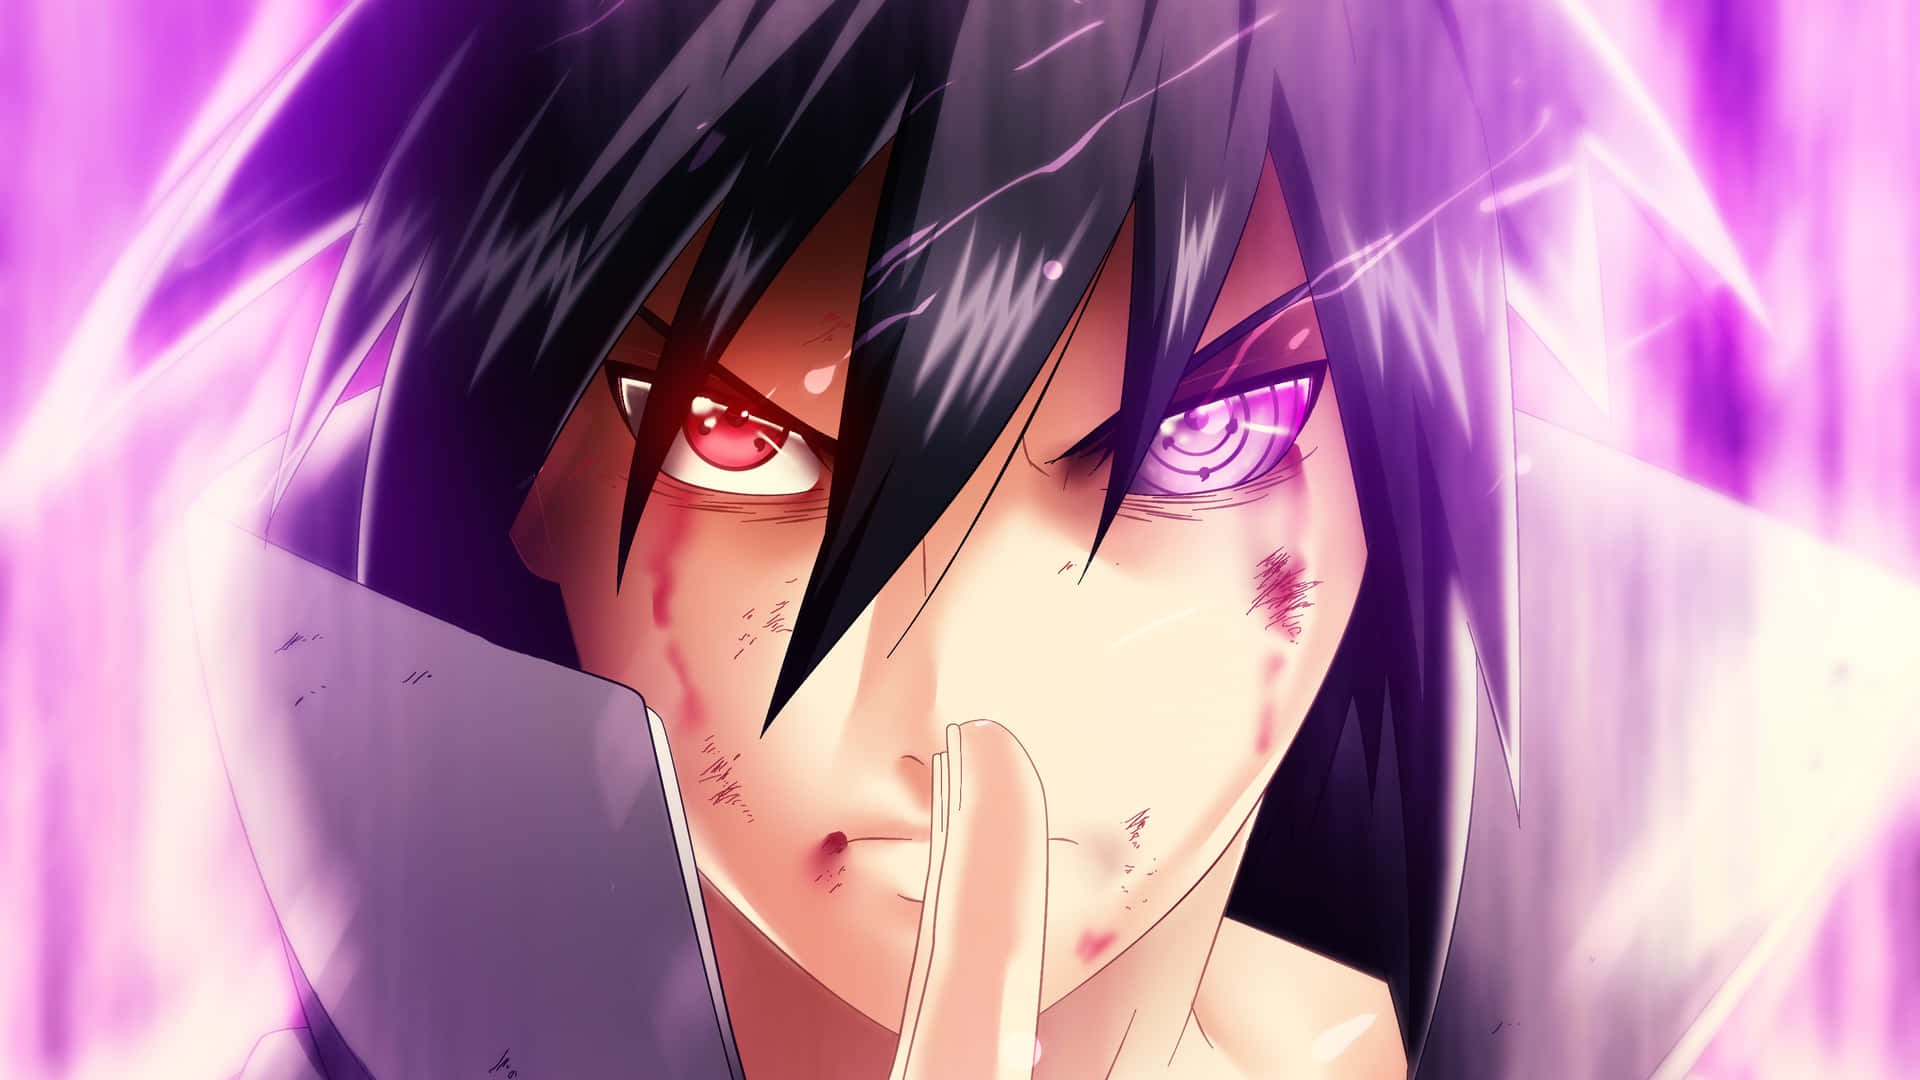 'mighty Powers Can Be Yours With Rinnegan Fearless In The Face Of Danger!' Background